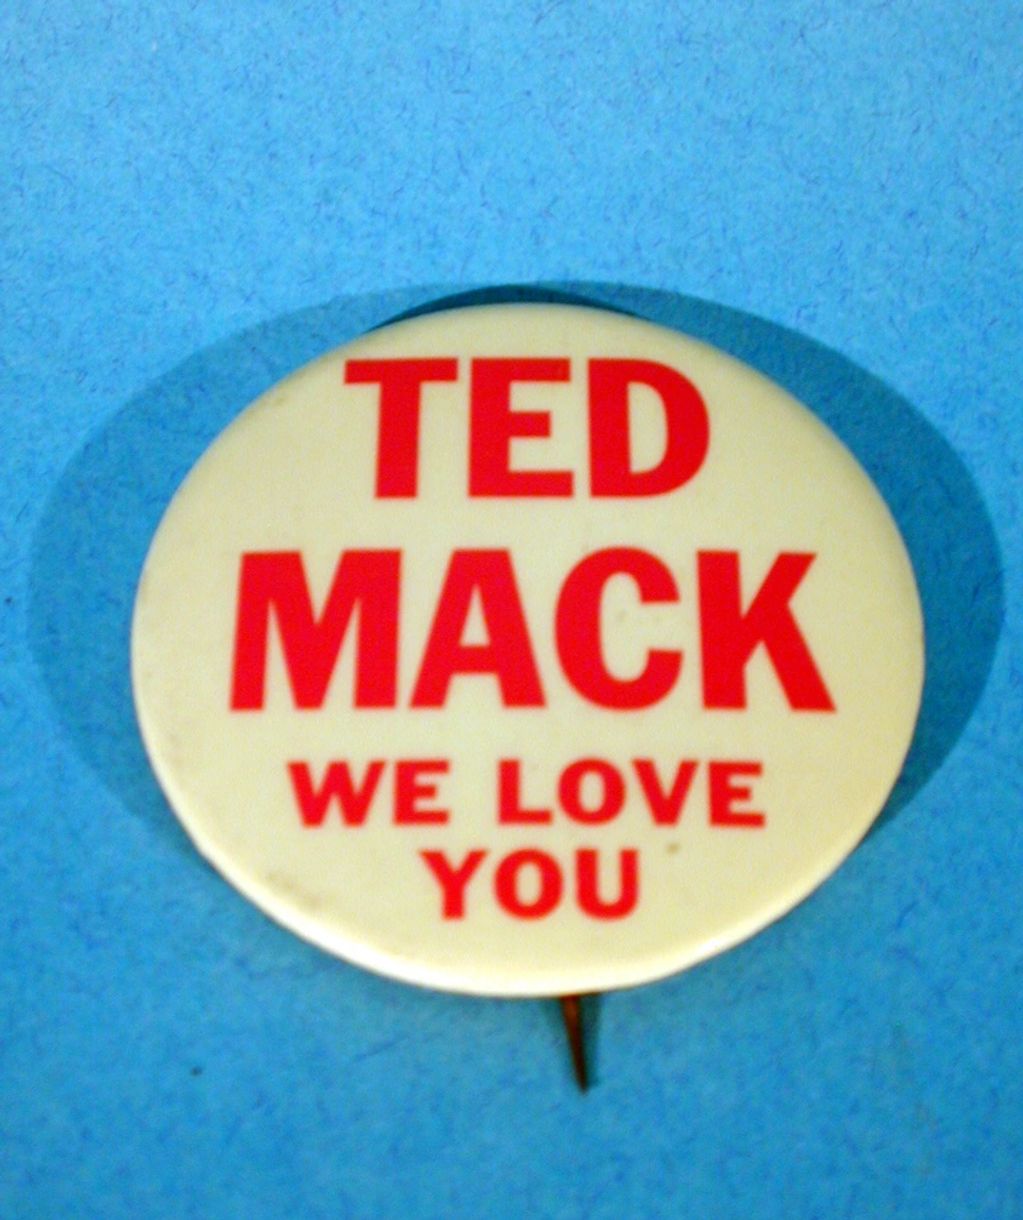 Pin back badge worn by members of 
The Ted Mack Fan Club circa 1960
